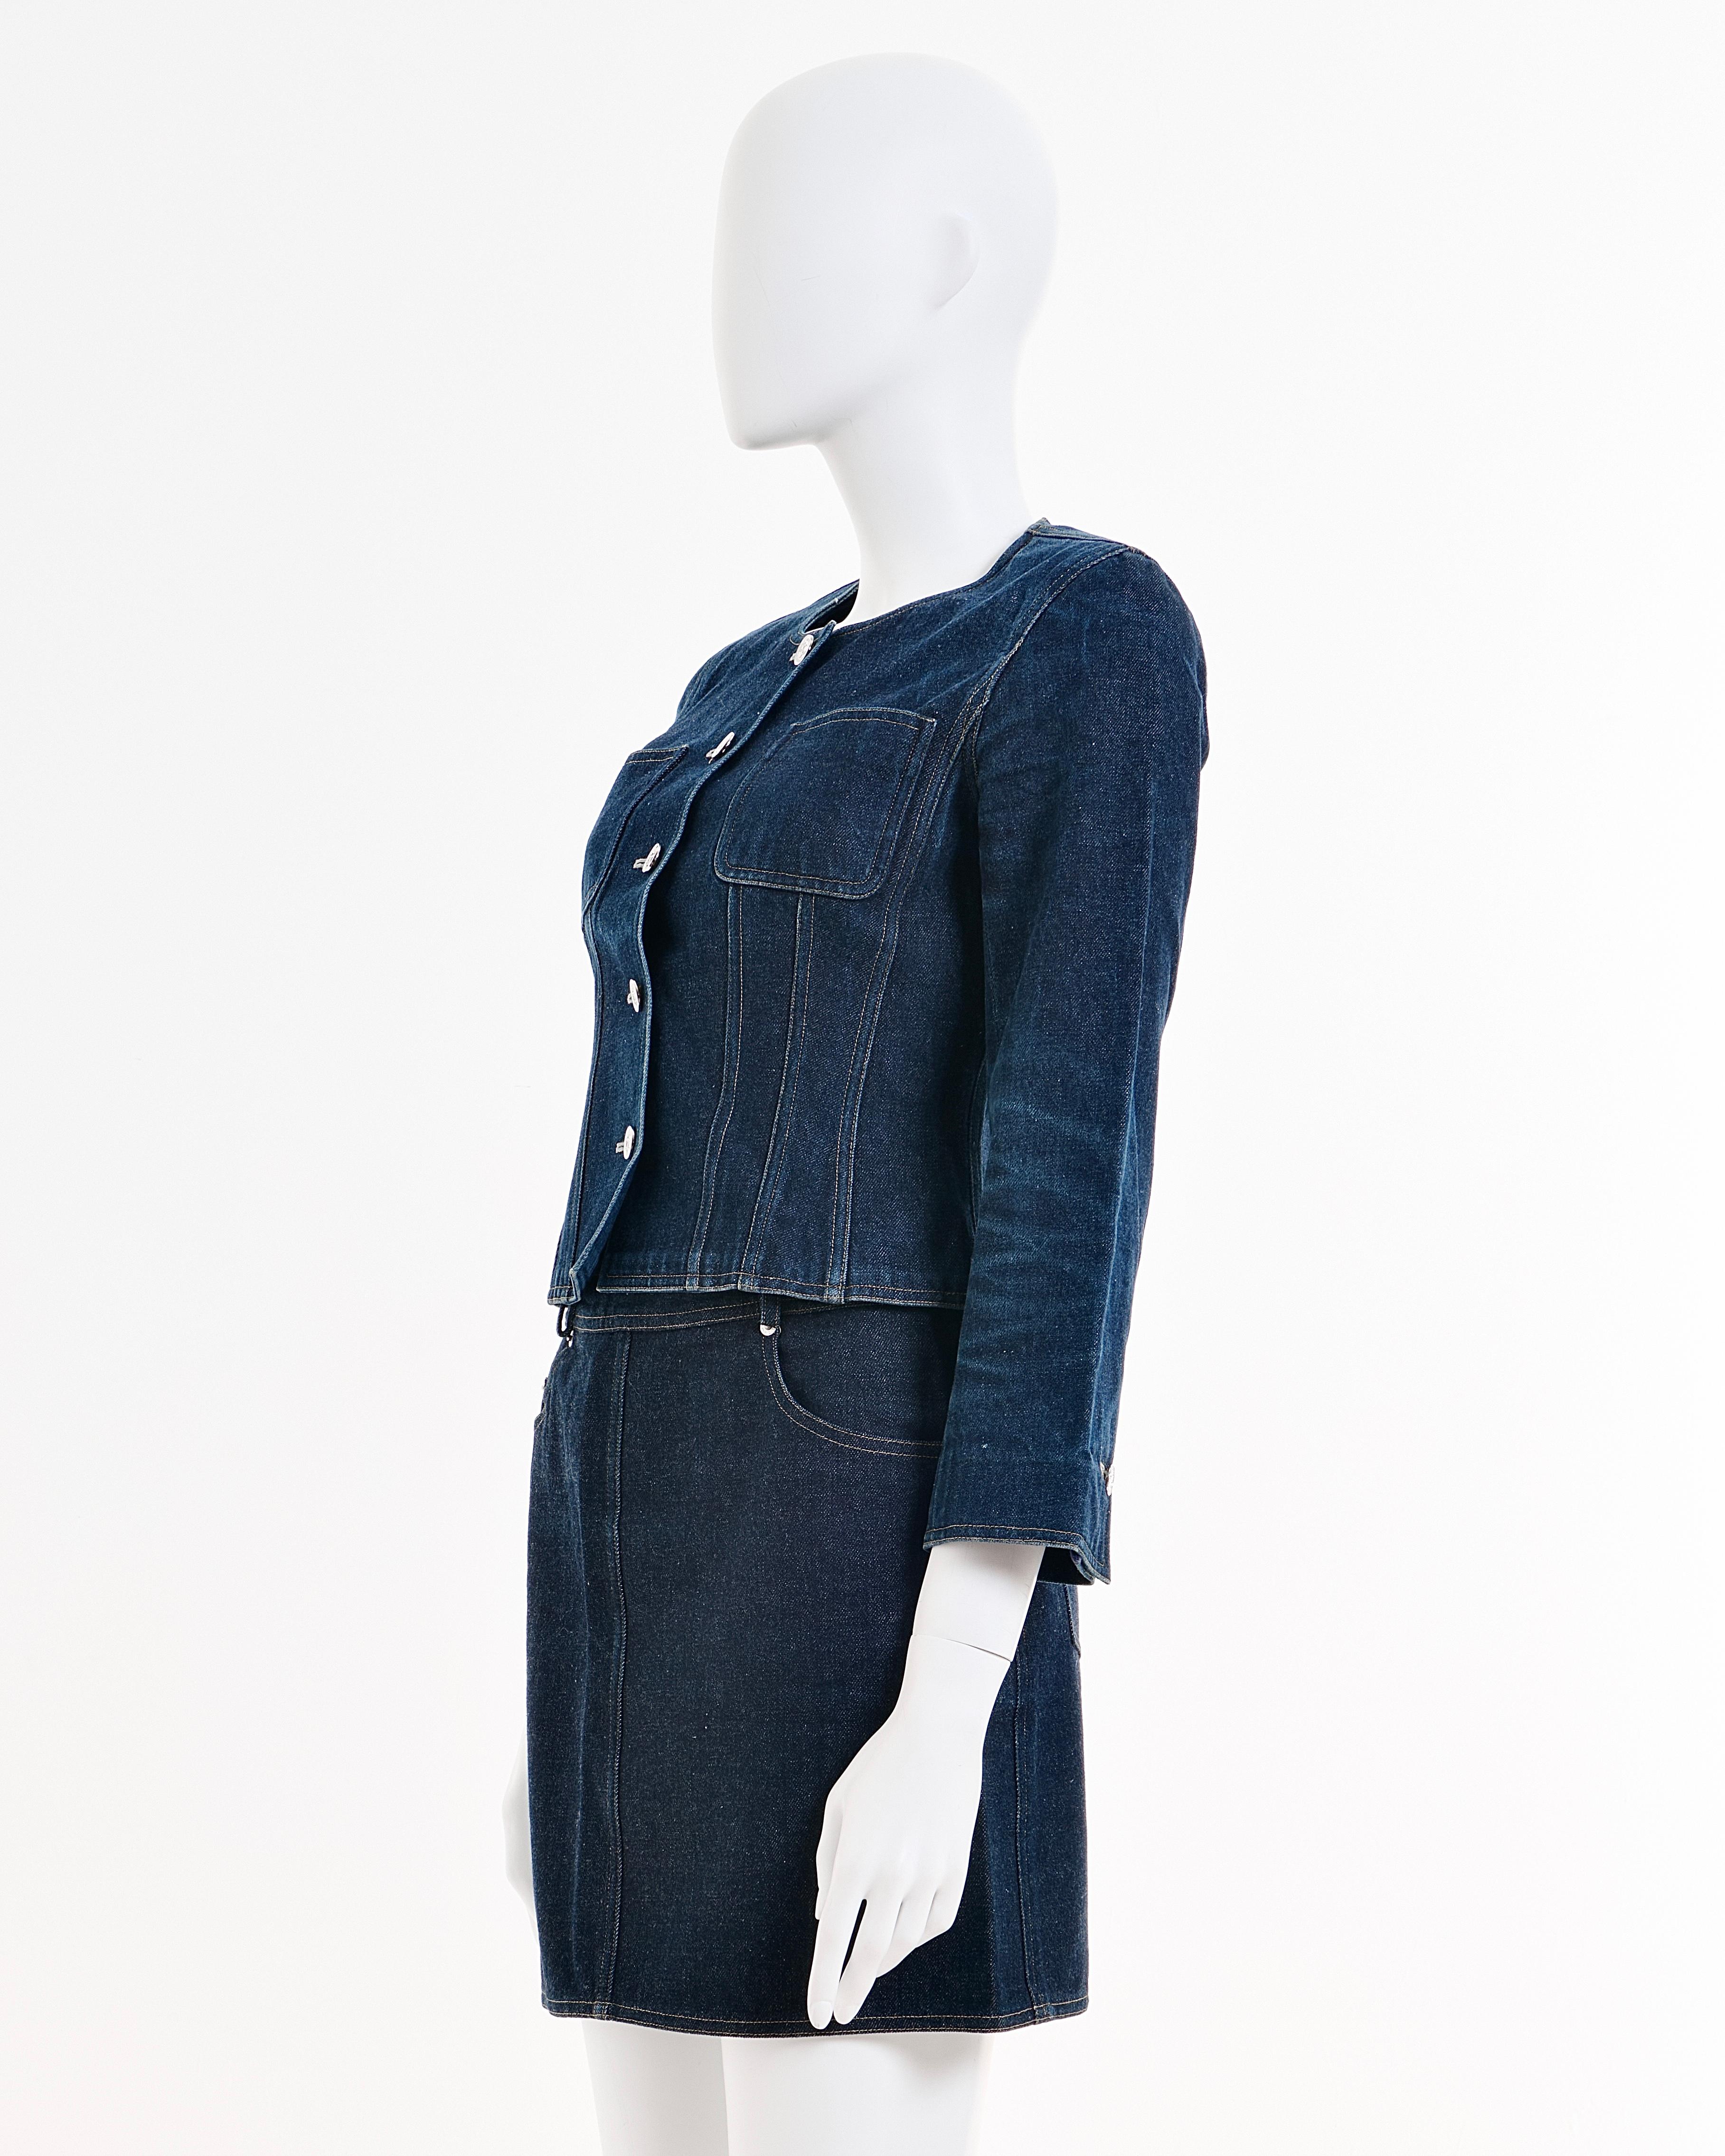 Chanel by Karl Lagerfeld S/S 1996 Blue denim indigo jacket and mini skirt set In Good Condition For Sale In Milano, IT